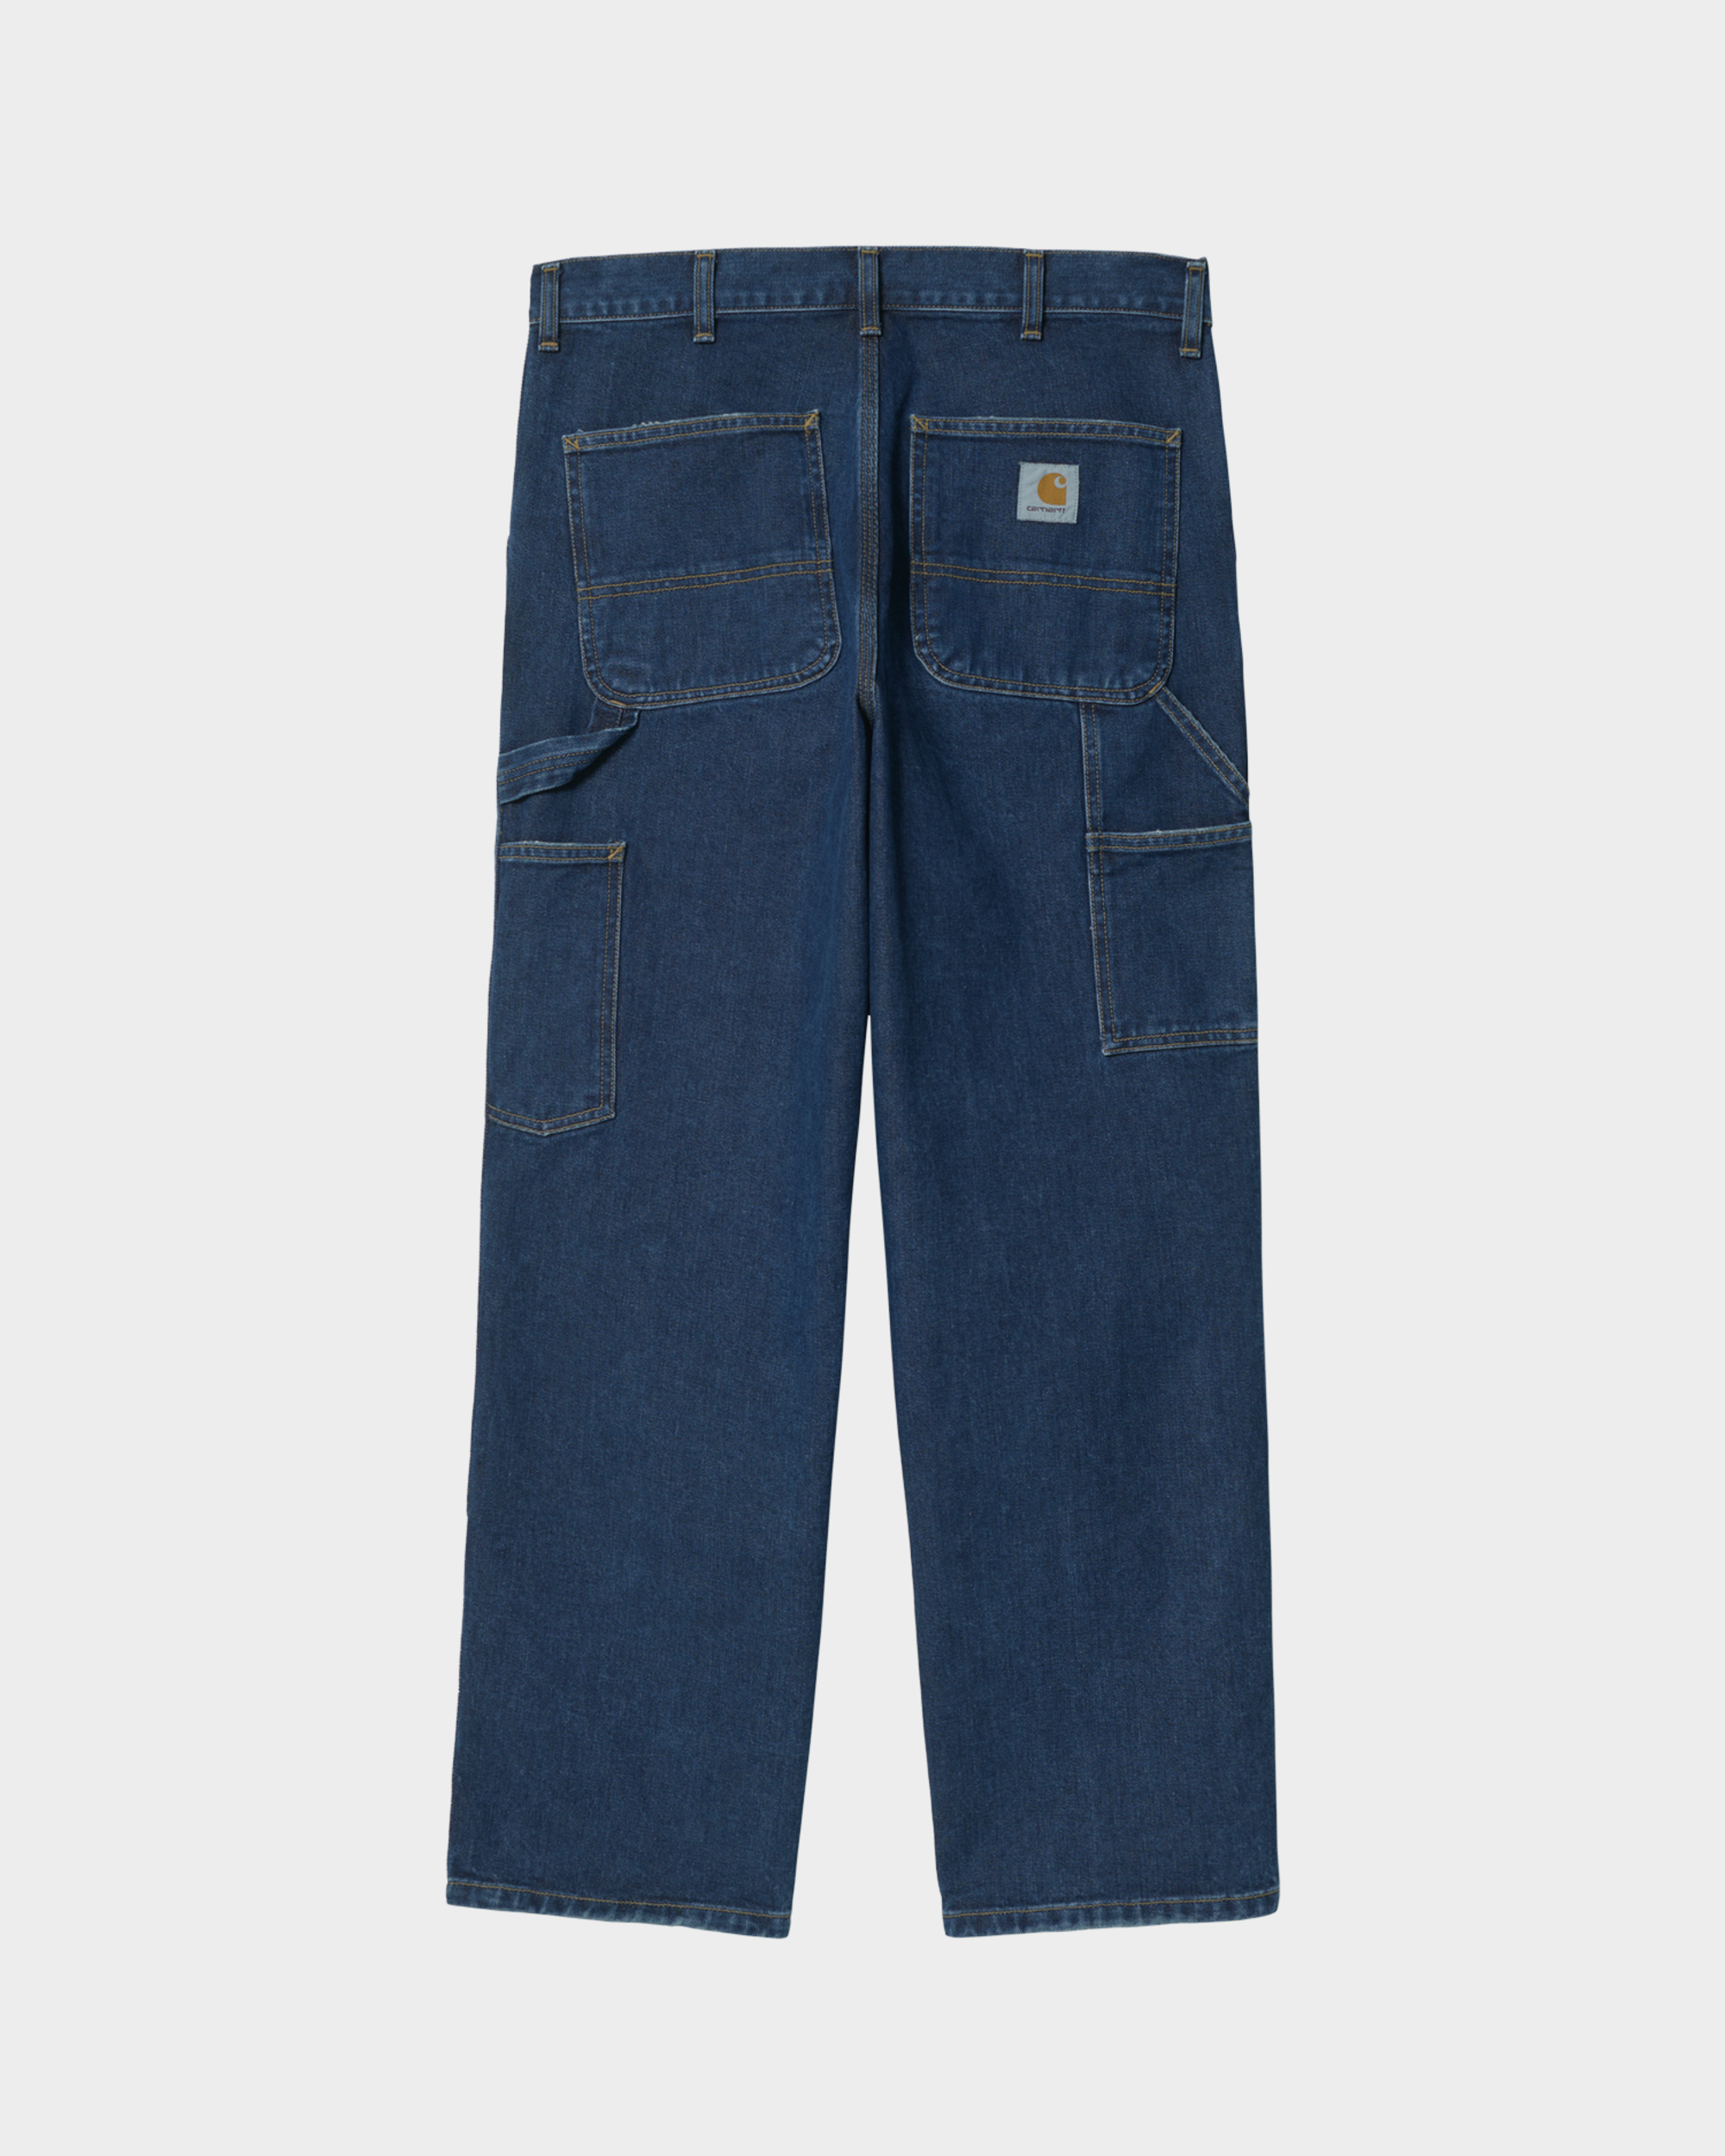 Carhartt Double Knee Pant Blue Stone Washed